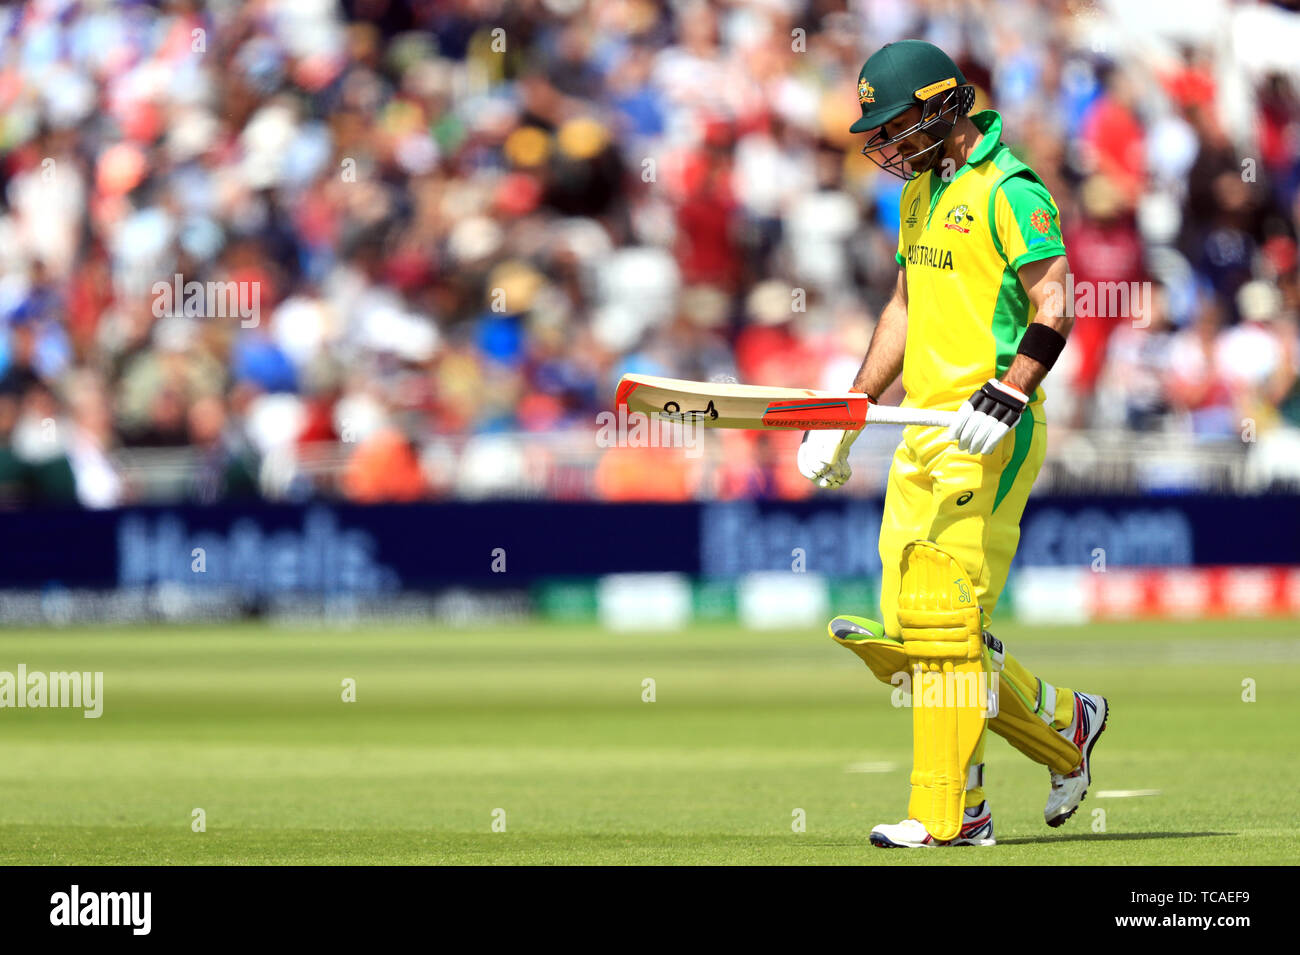 Australia's Glenn Maxwell walks off after being dismissed by West Indies' Sheldon Cottrell (not pictured) during the ICC Cricket World Cup group stage match at Trent Bridge, Nottingham. Stock Photo